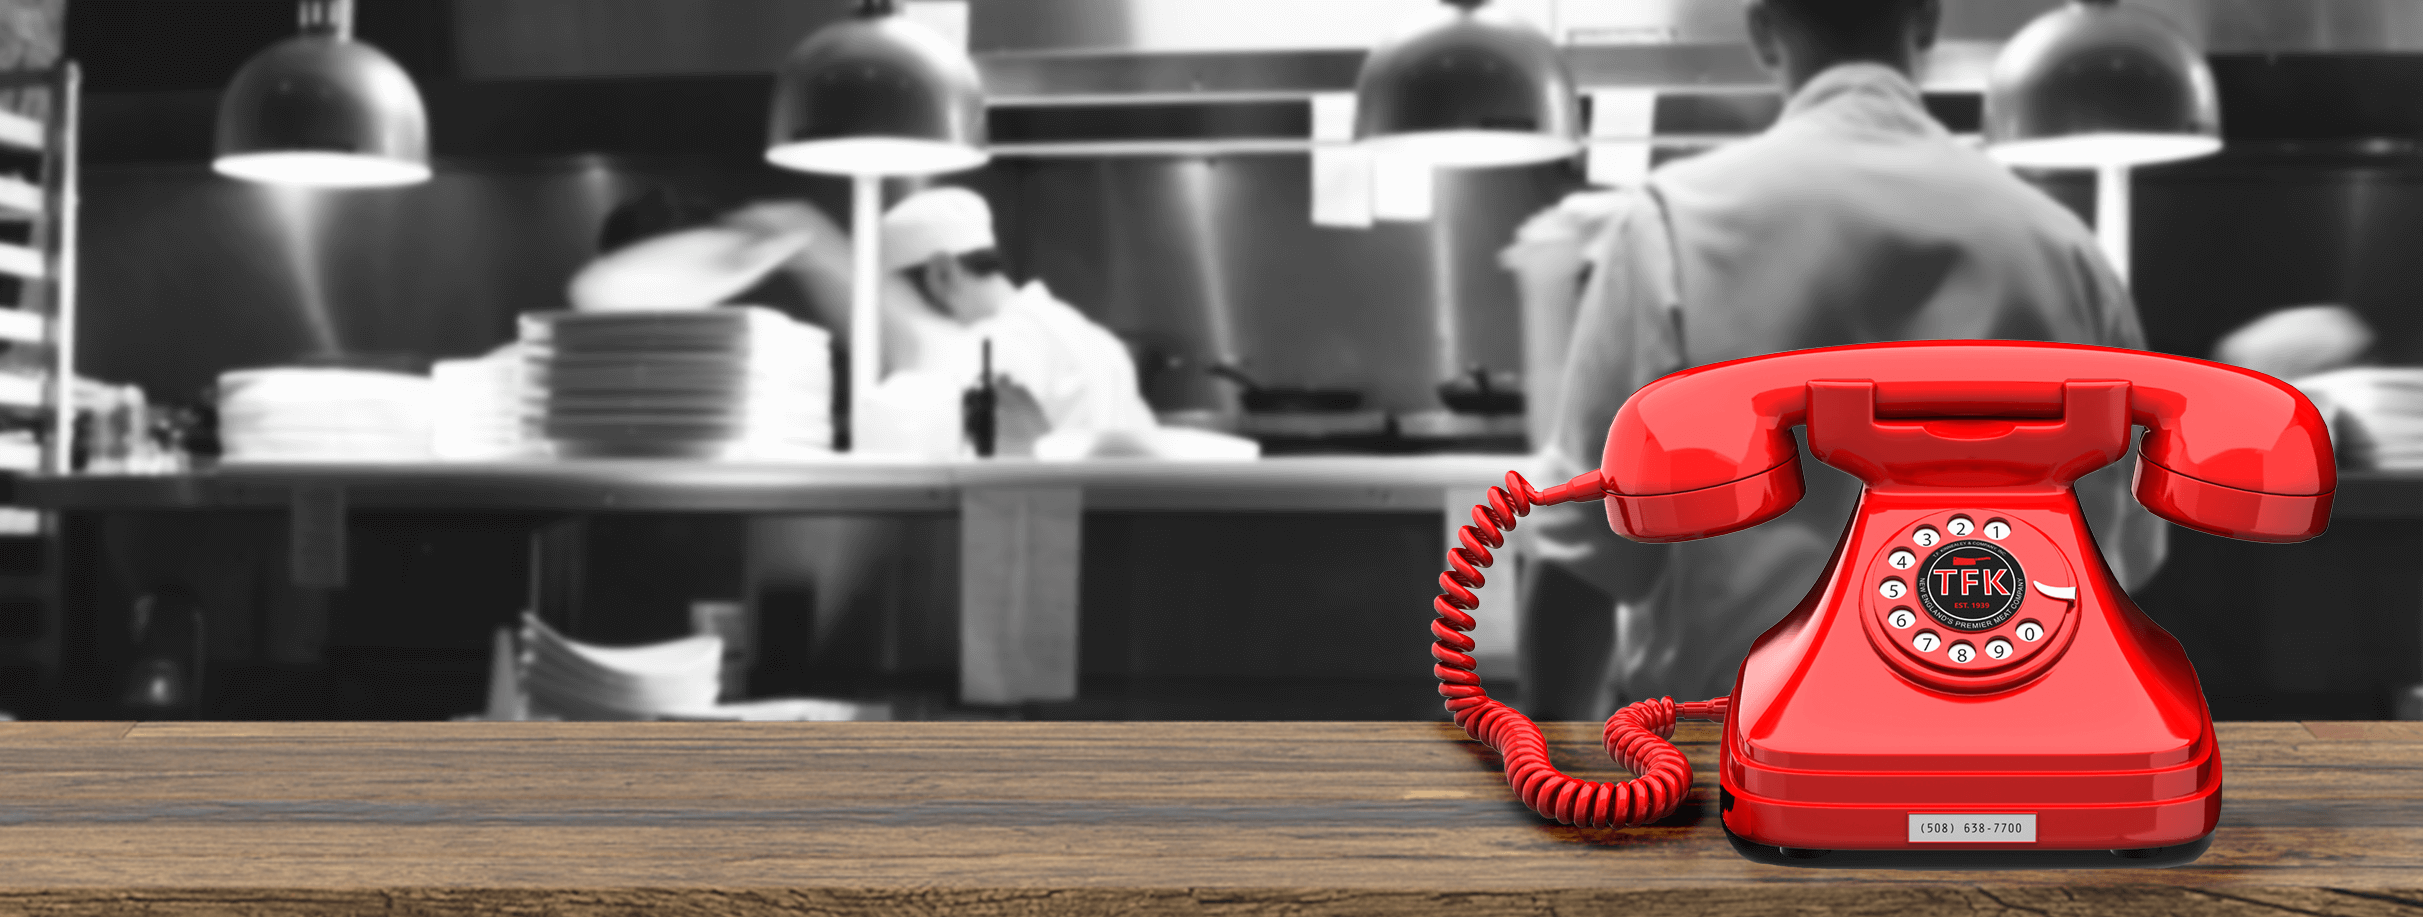 A red phone on a table in front of chefs working in the background.